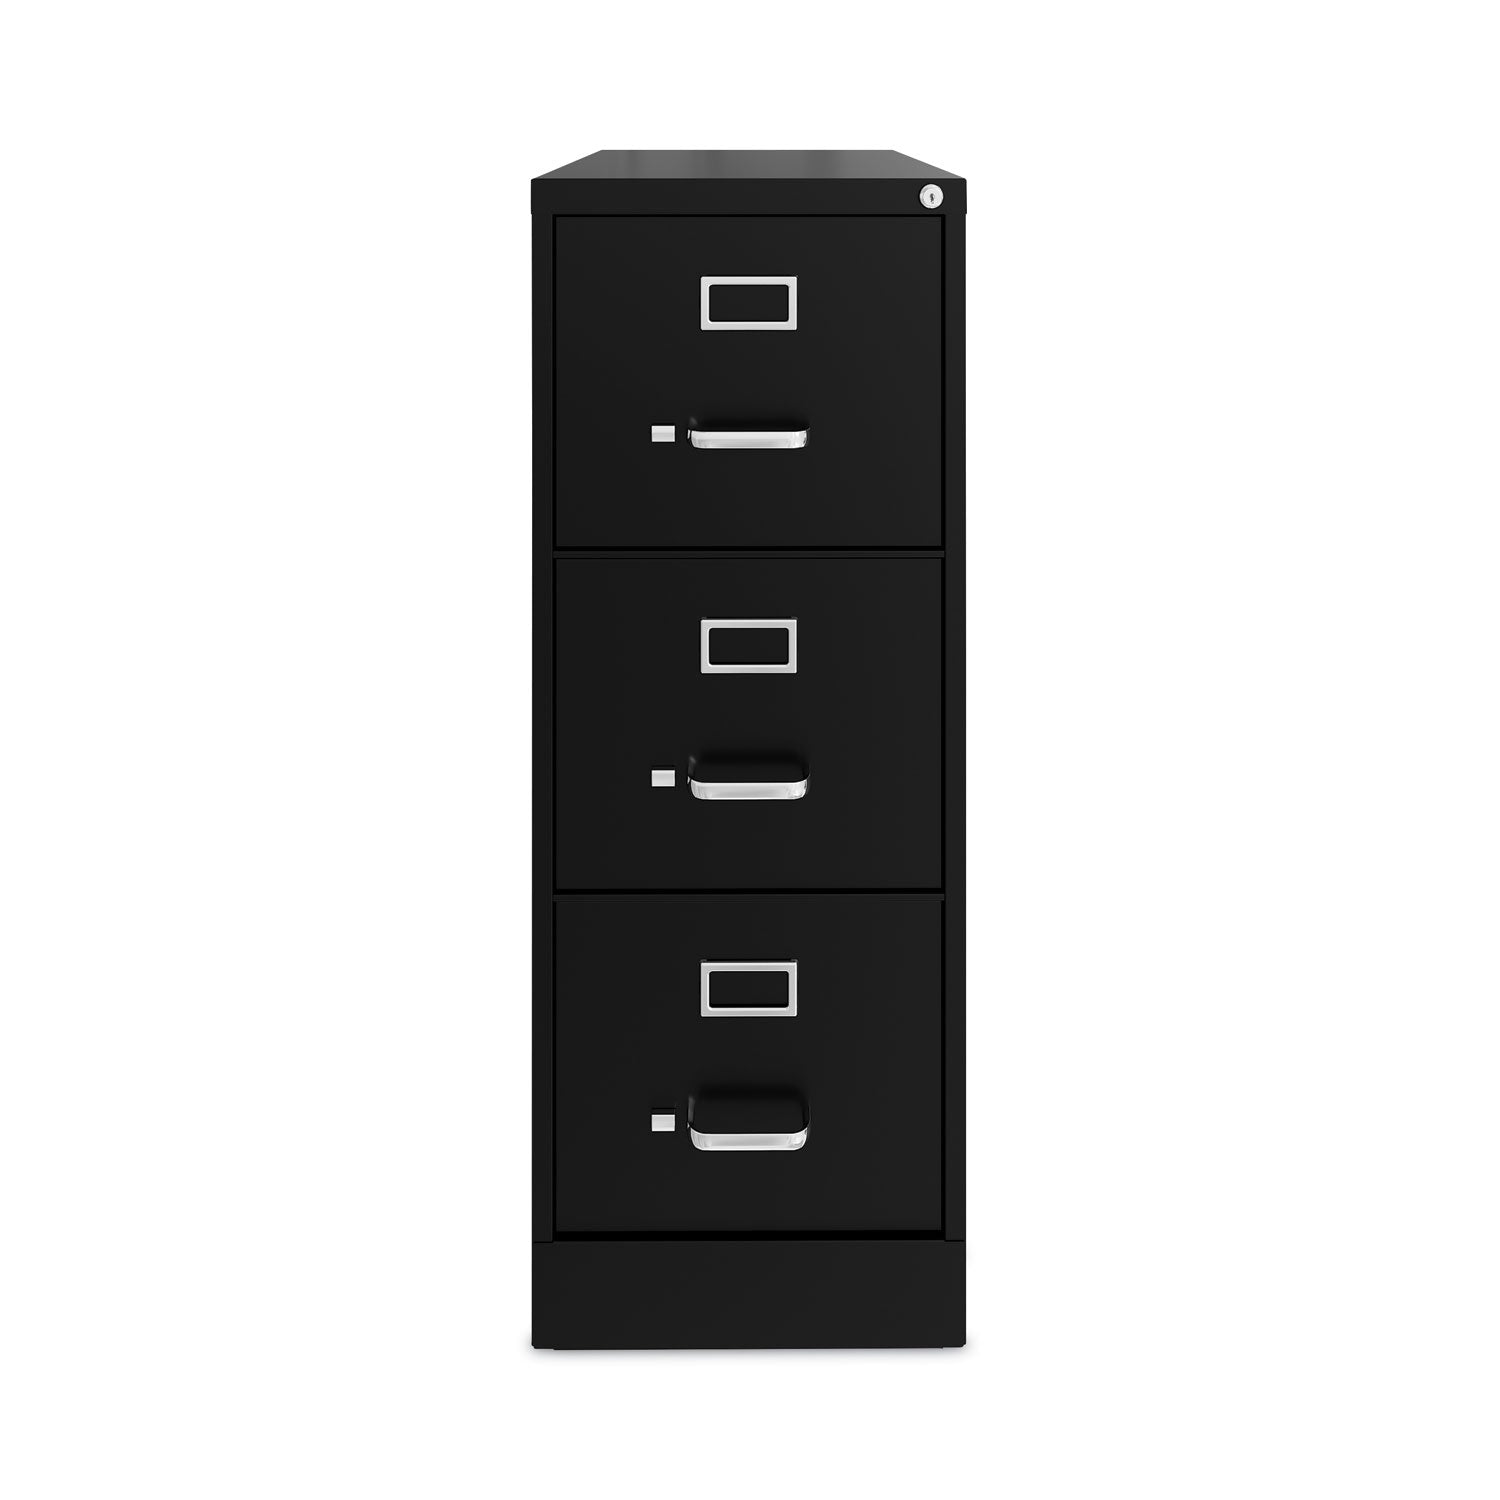 vertical-letter-file-cabinet-3-letter-size-file-drawers-black-15-x-22-x-4019_hid24856 - 1